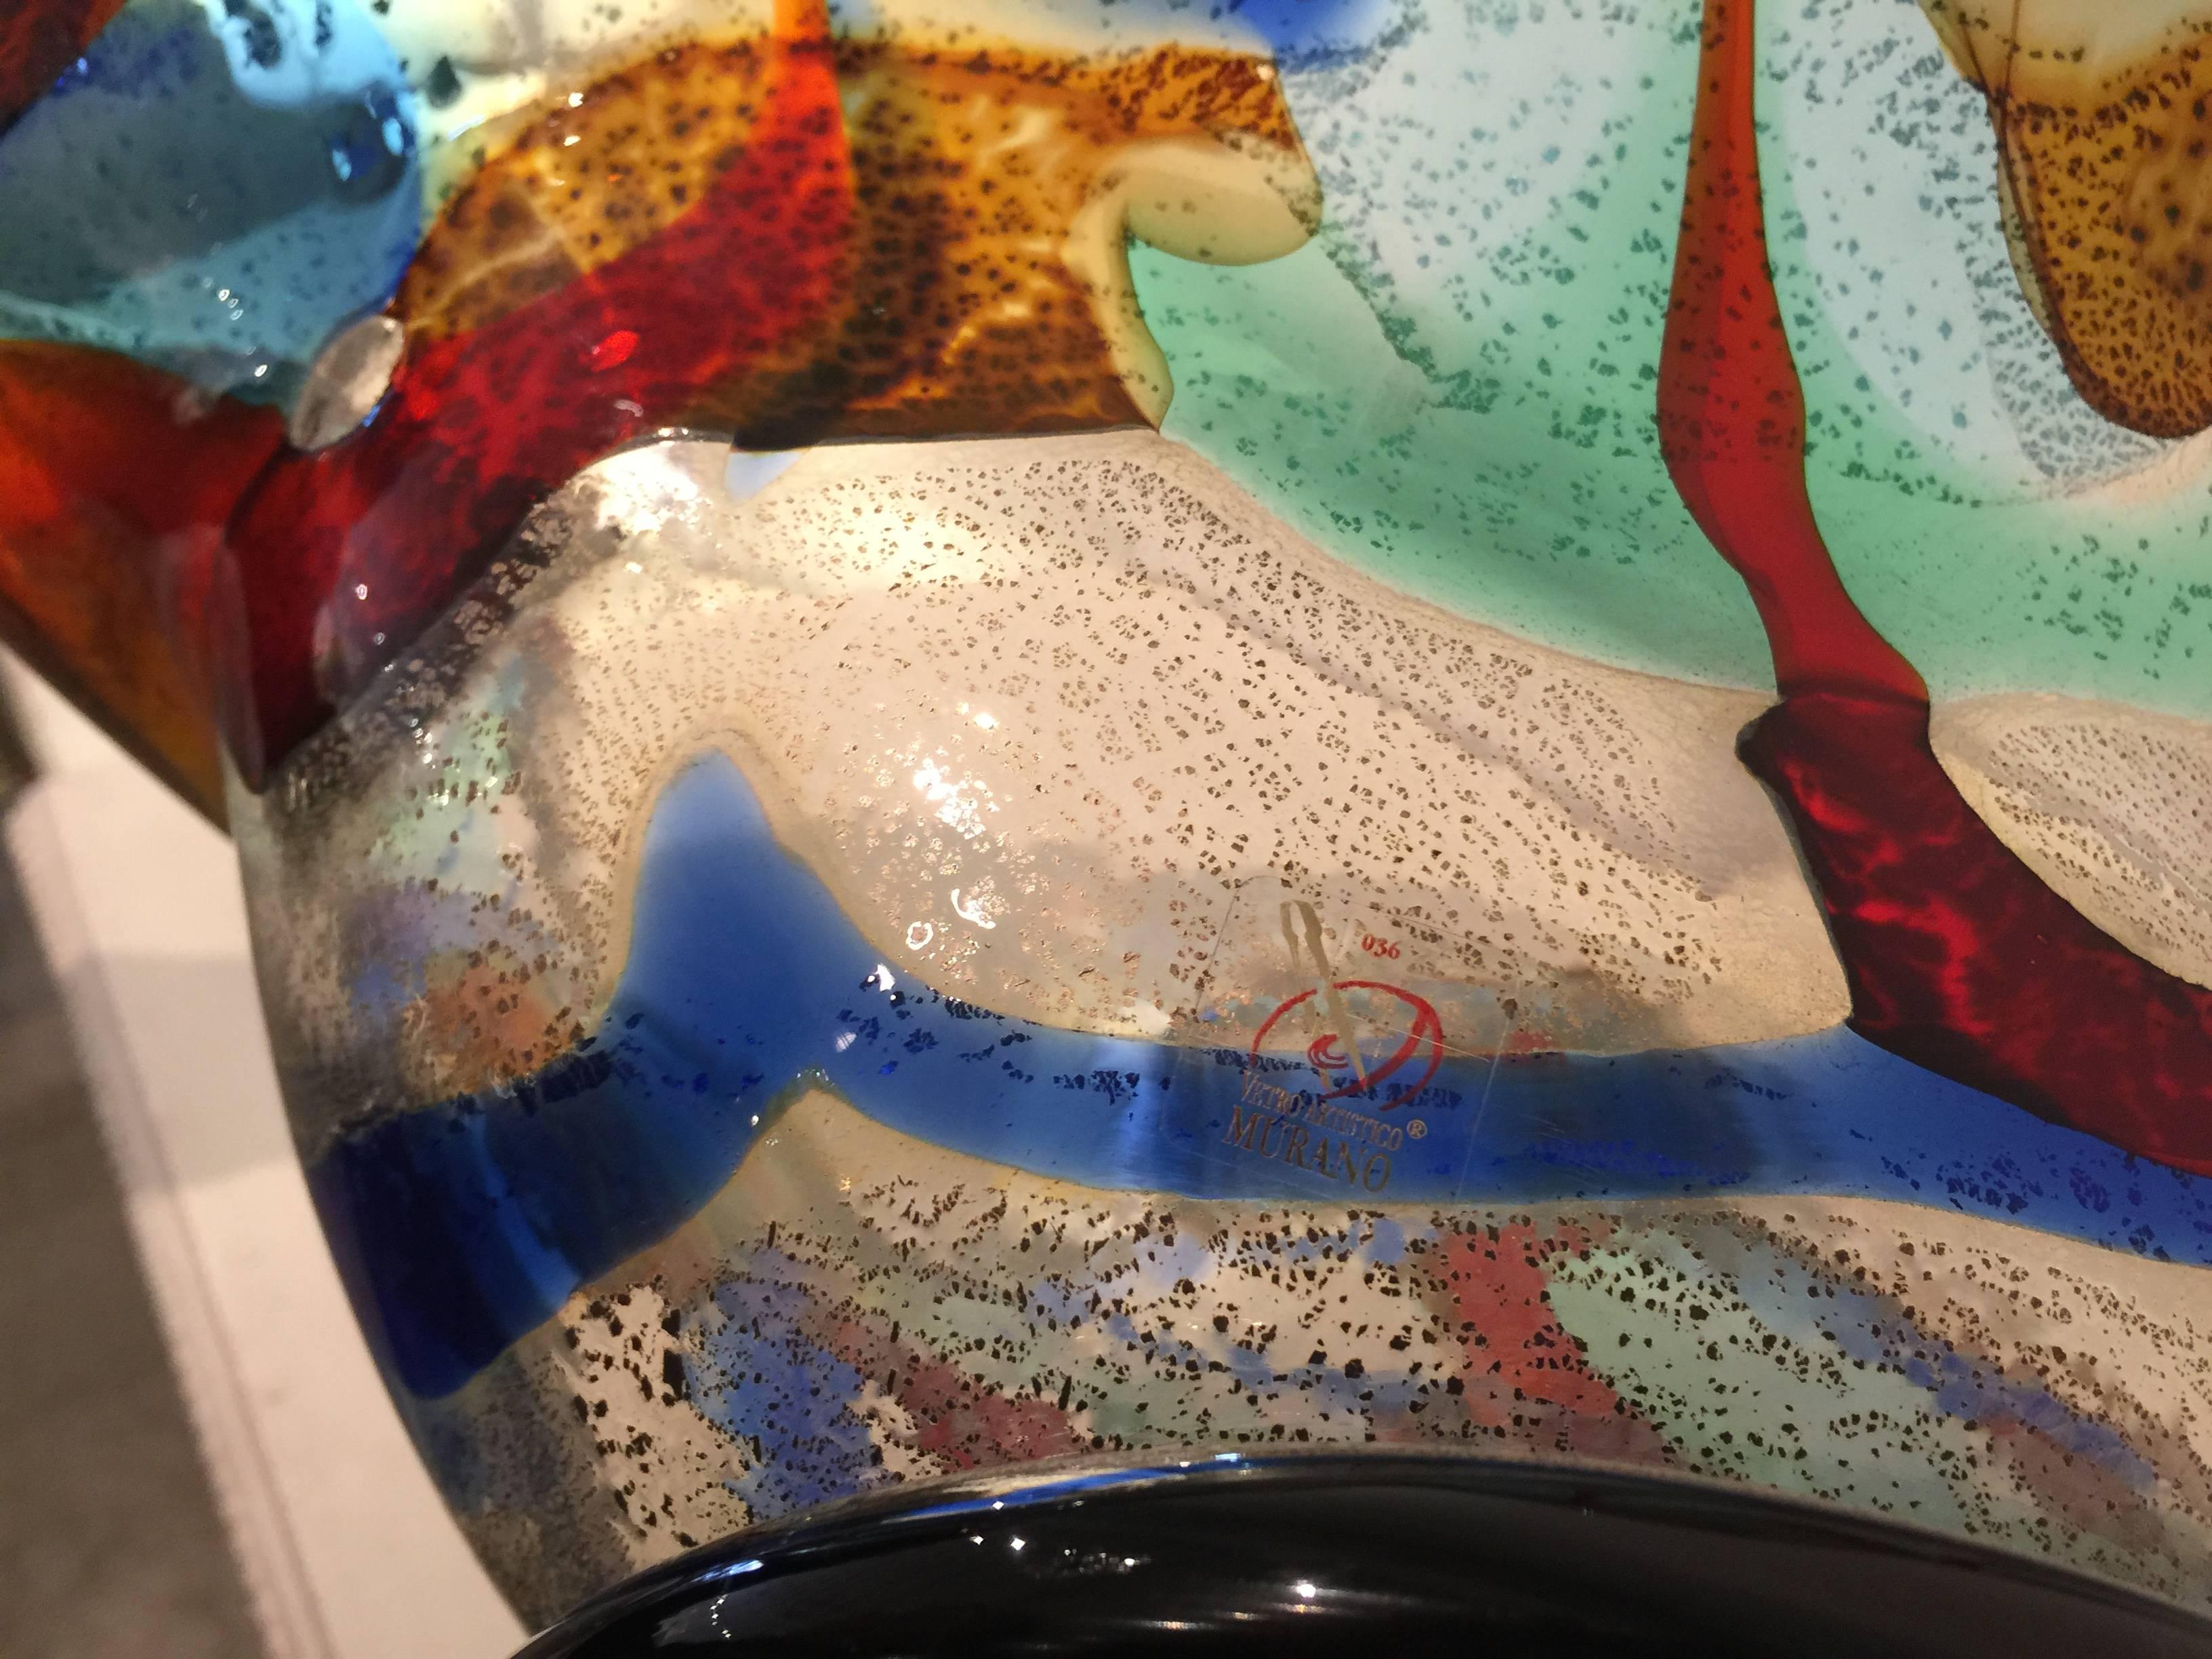 Large centerpiece bowl in rich colors of burgundy, cobalt, amber and sea foam with specks of clear turning to silver.
Signed on the bottom edge by Sergio Costantini. Murano sticker on the bottom and also includes certificate of